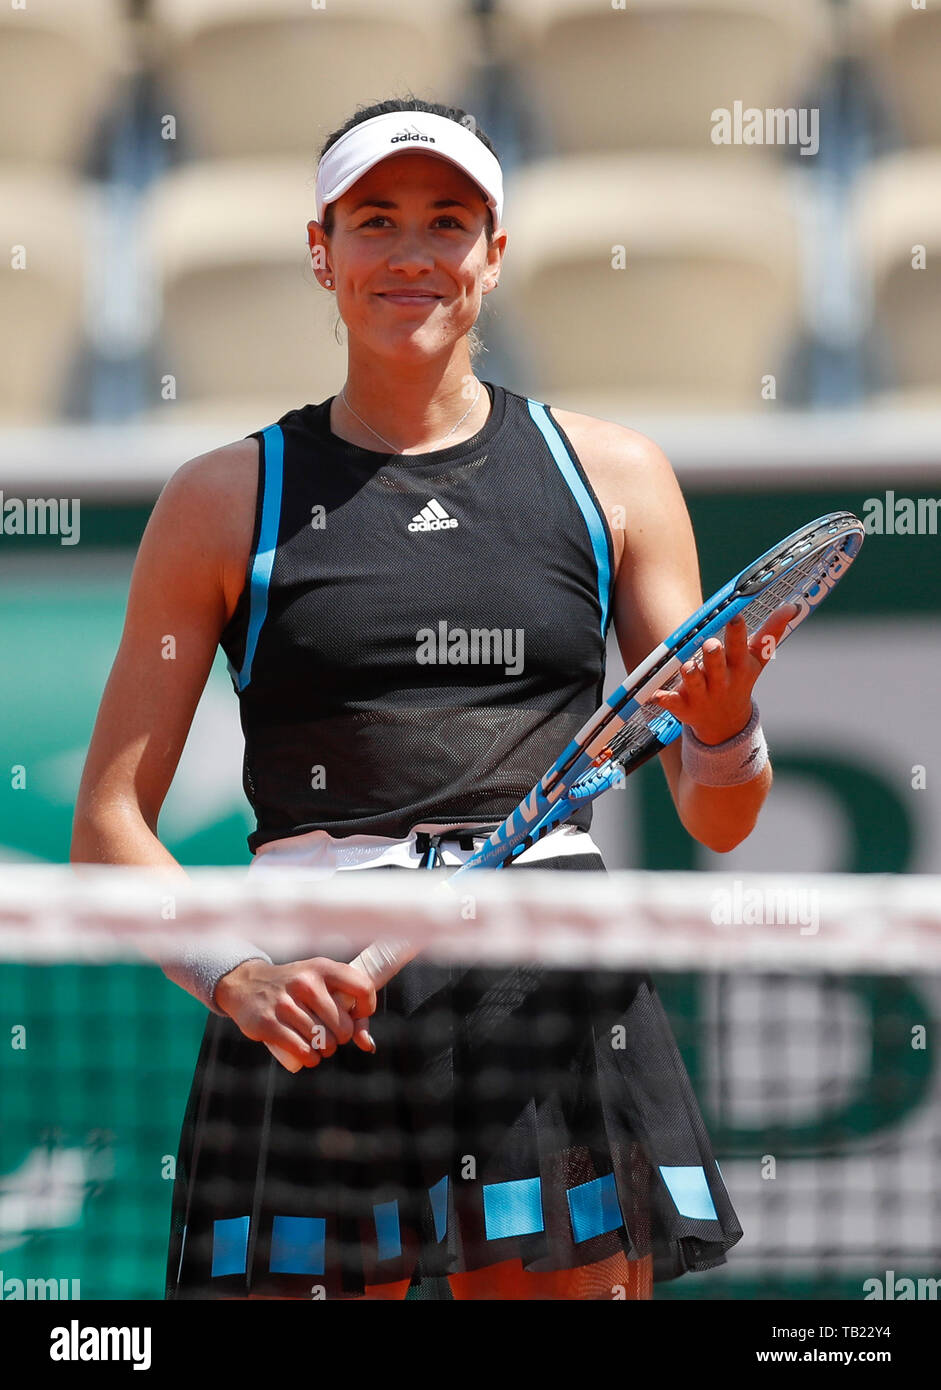 Paris. 29th May, 2019. Spain's Garbine Muguruza celebrates after winning  the women's singles second round match with Sweden's Johanna Larsson at  French Open tennis tournament 2019 at Roland Garros in Paris, France